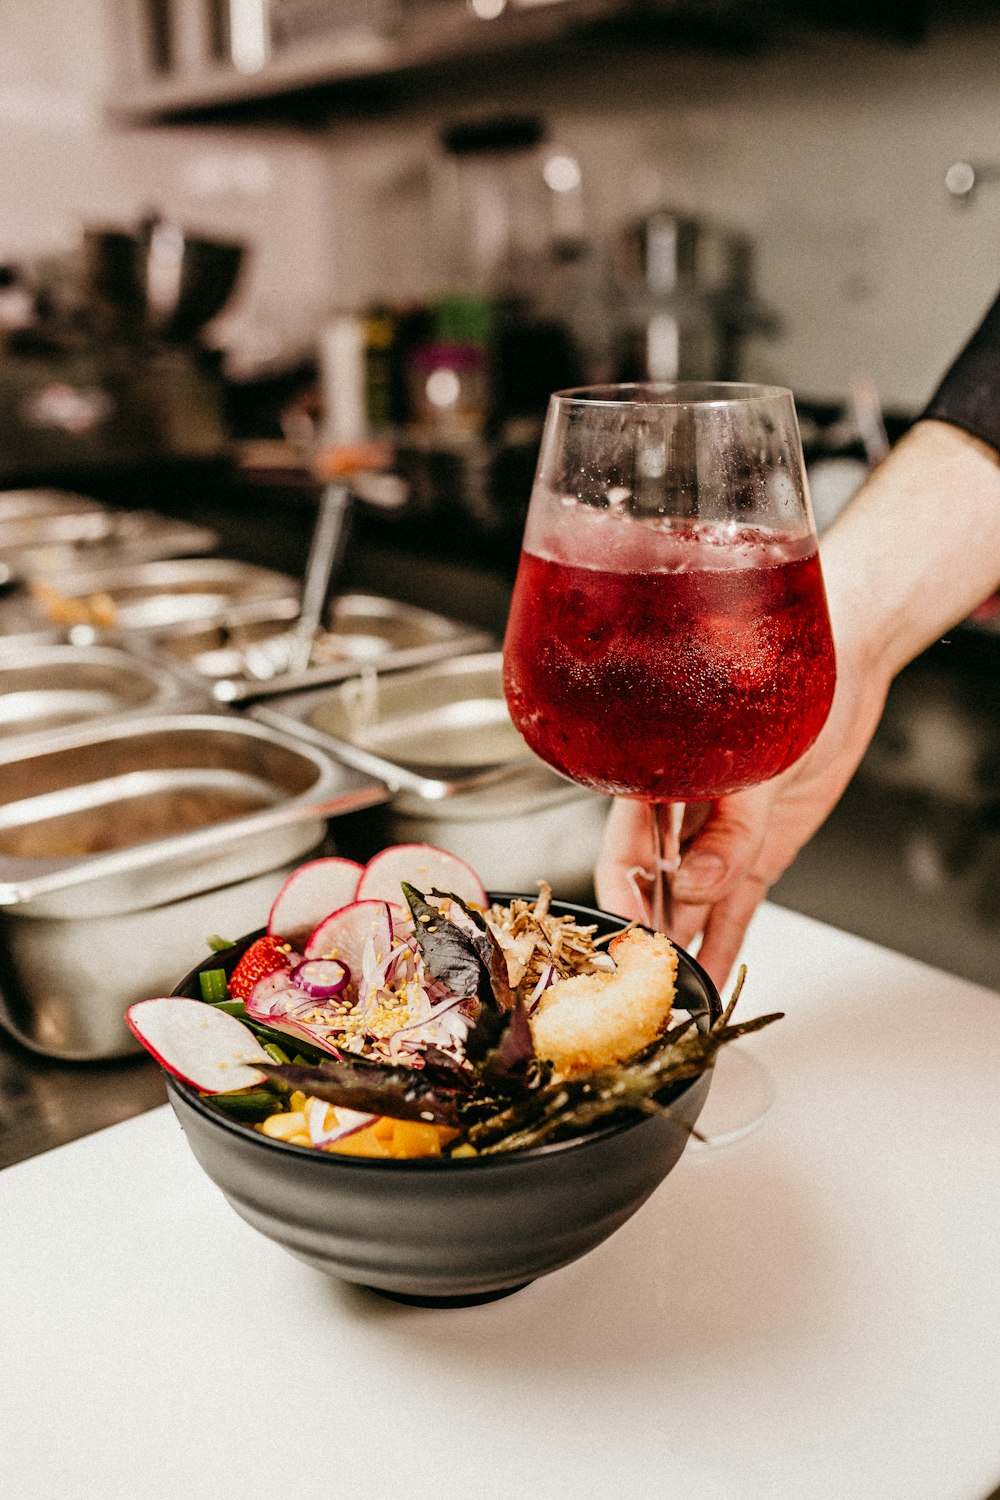 red wine in clear wine glass beside bowl full of food